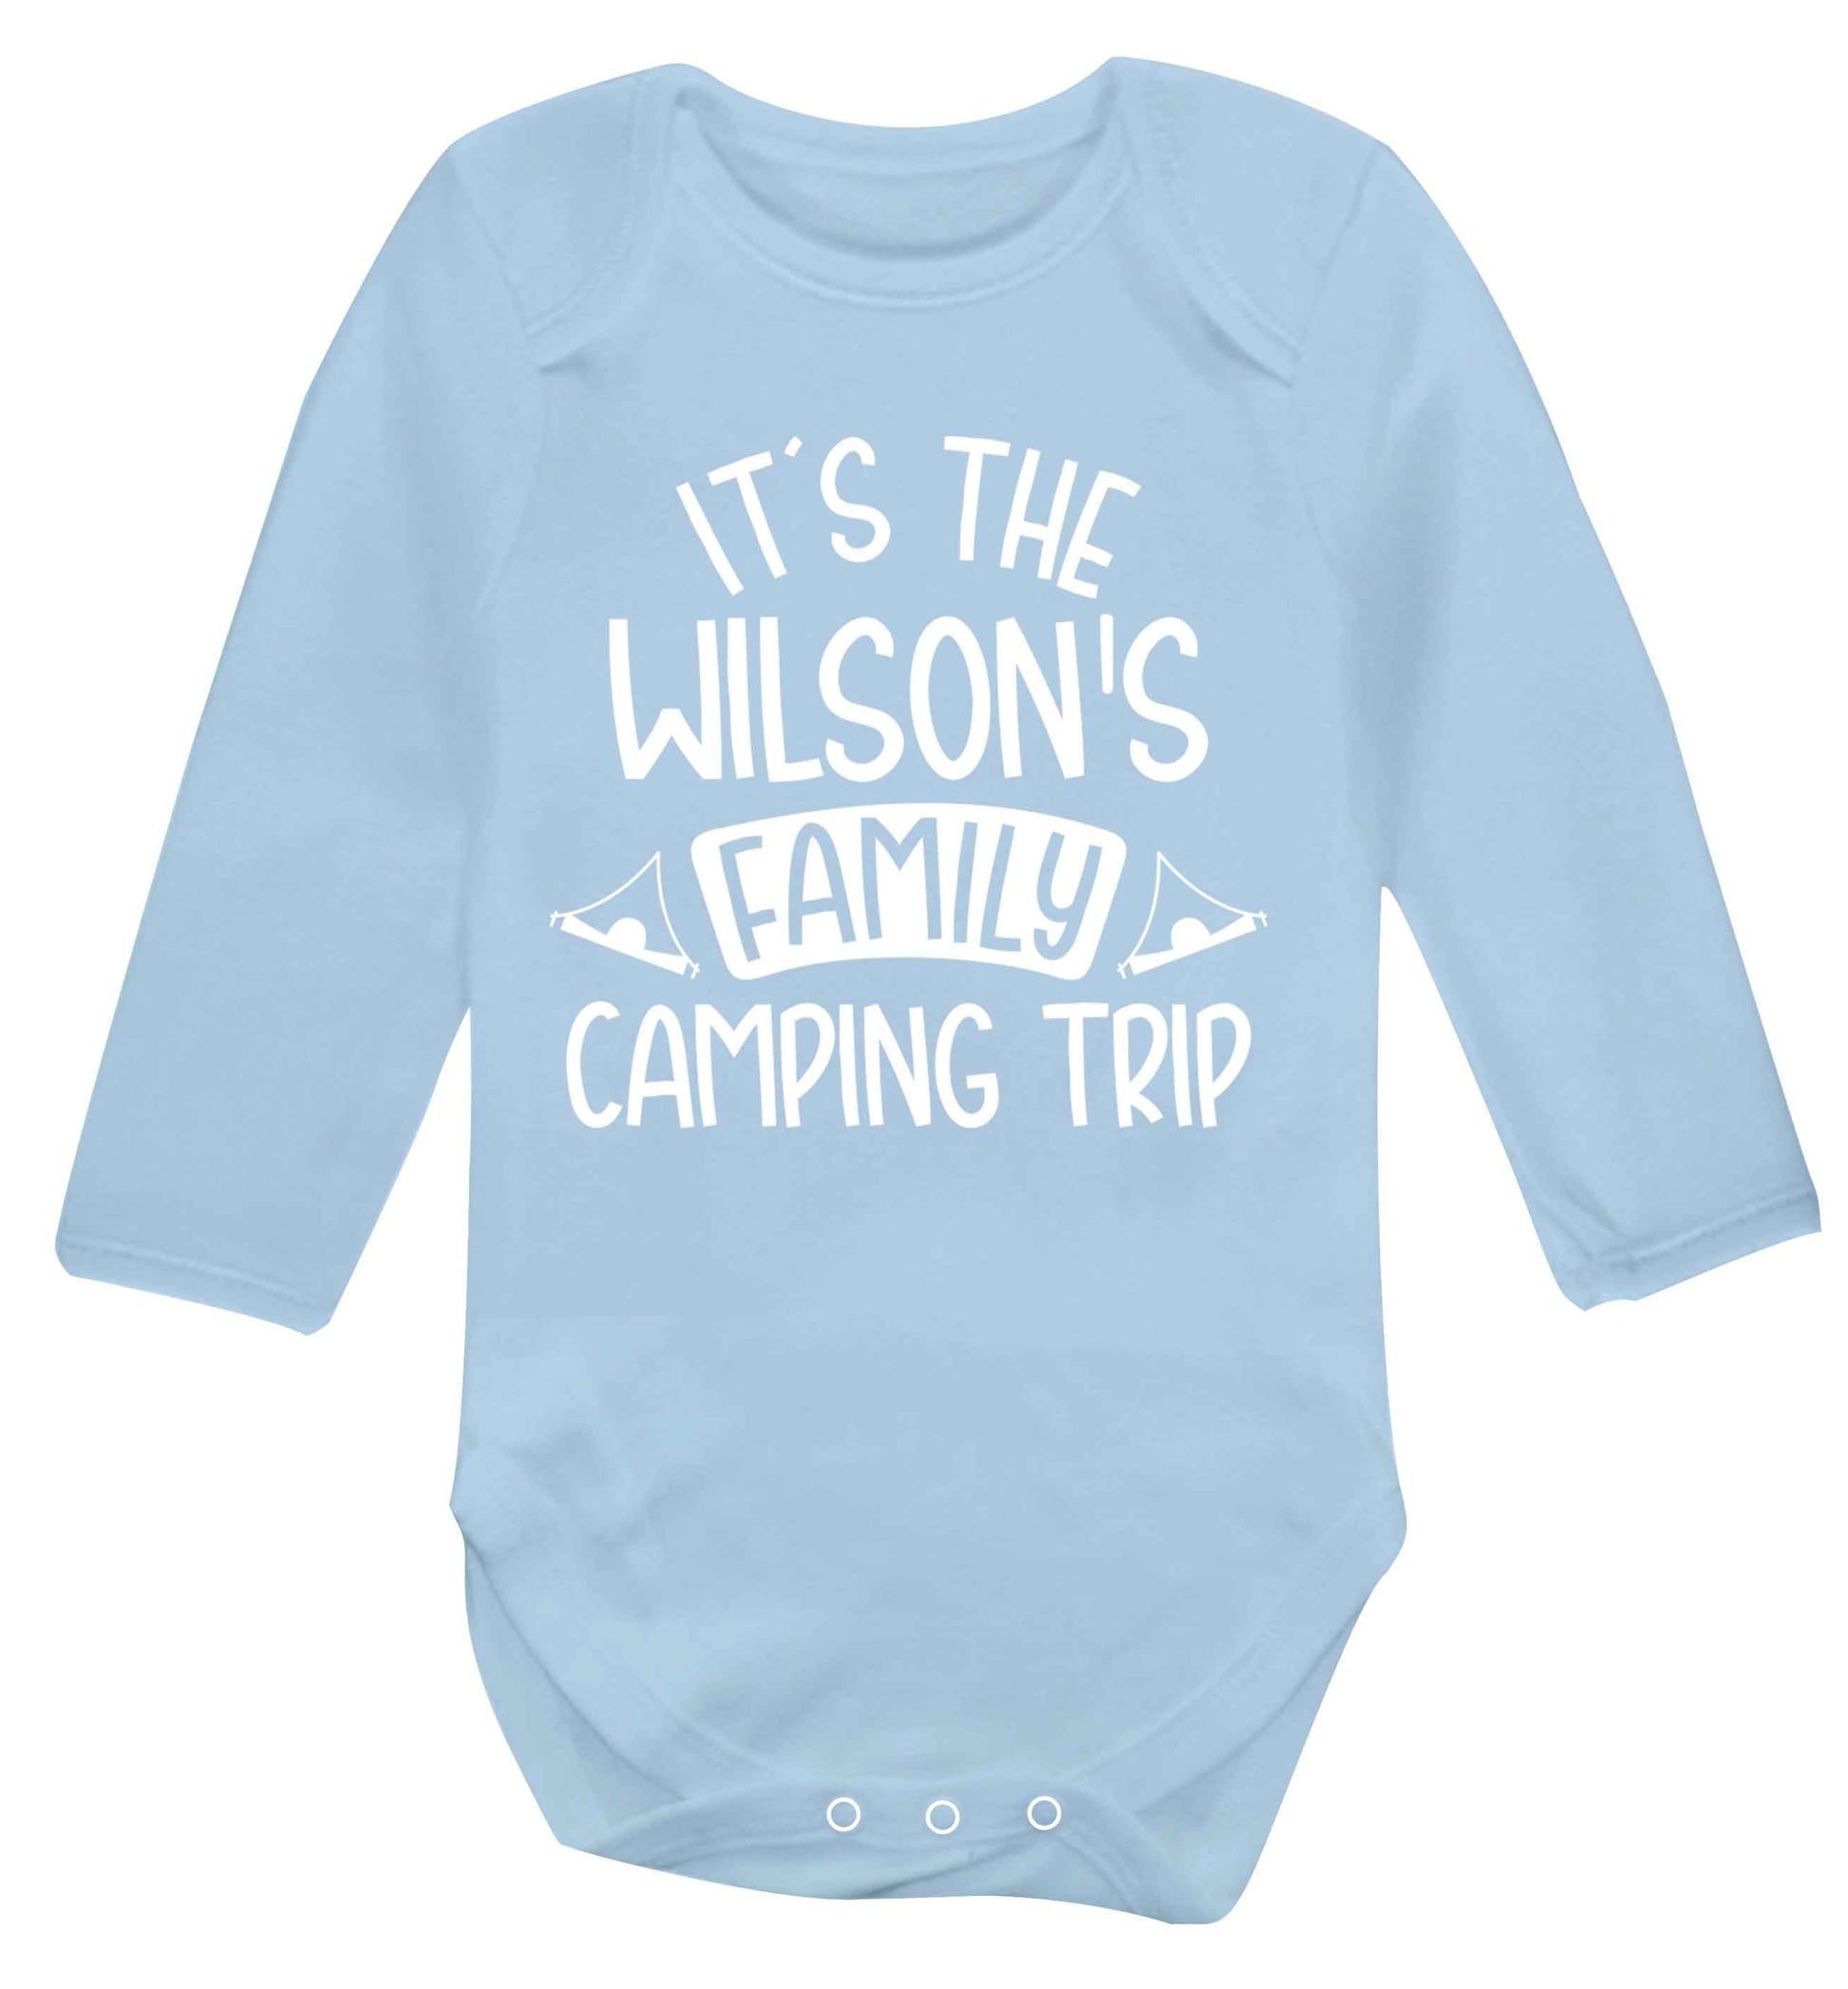 It's the Wilson's family camping trip personalised Baby Vest long sleeved pale blue 6-12 months